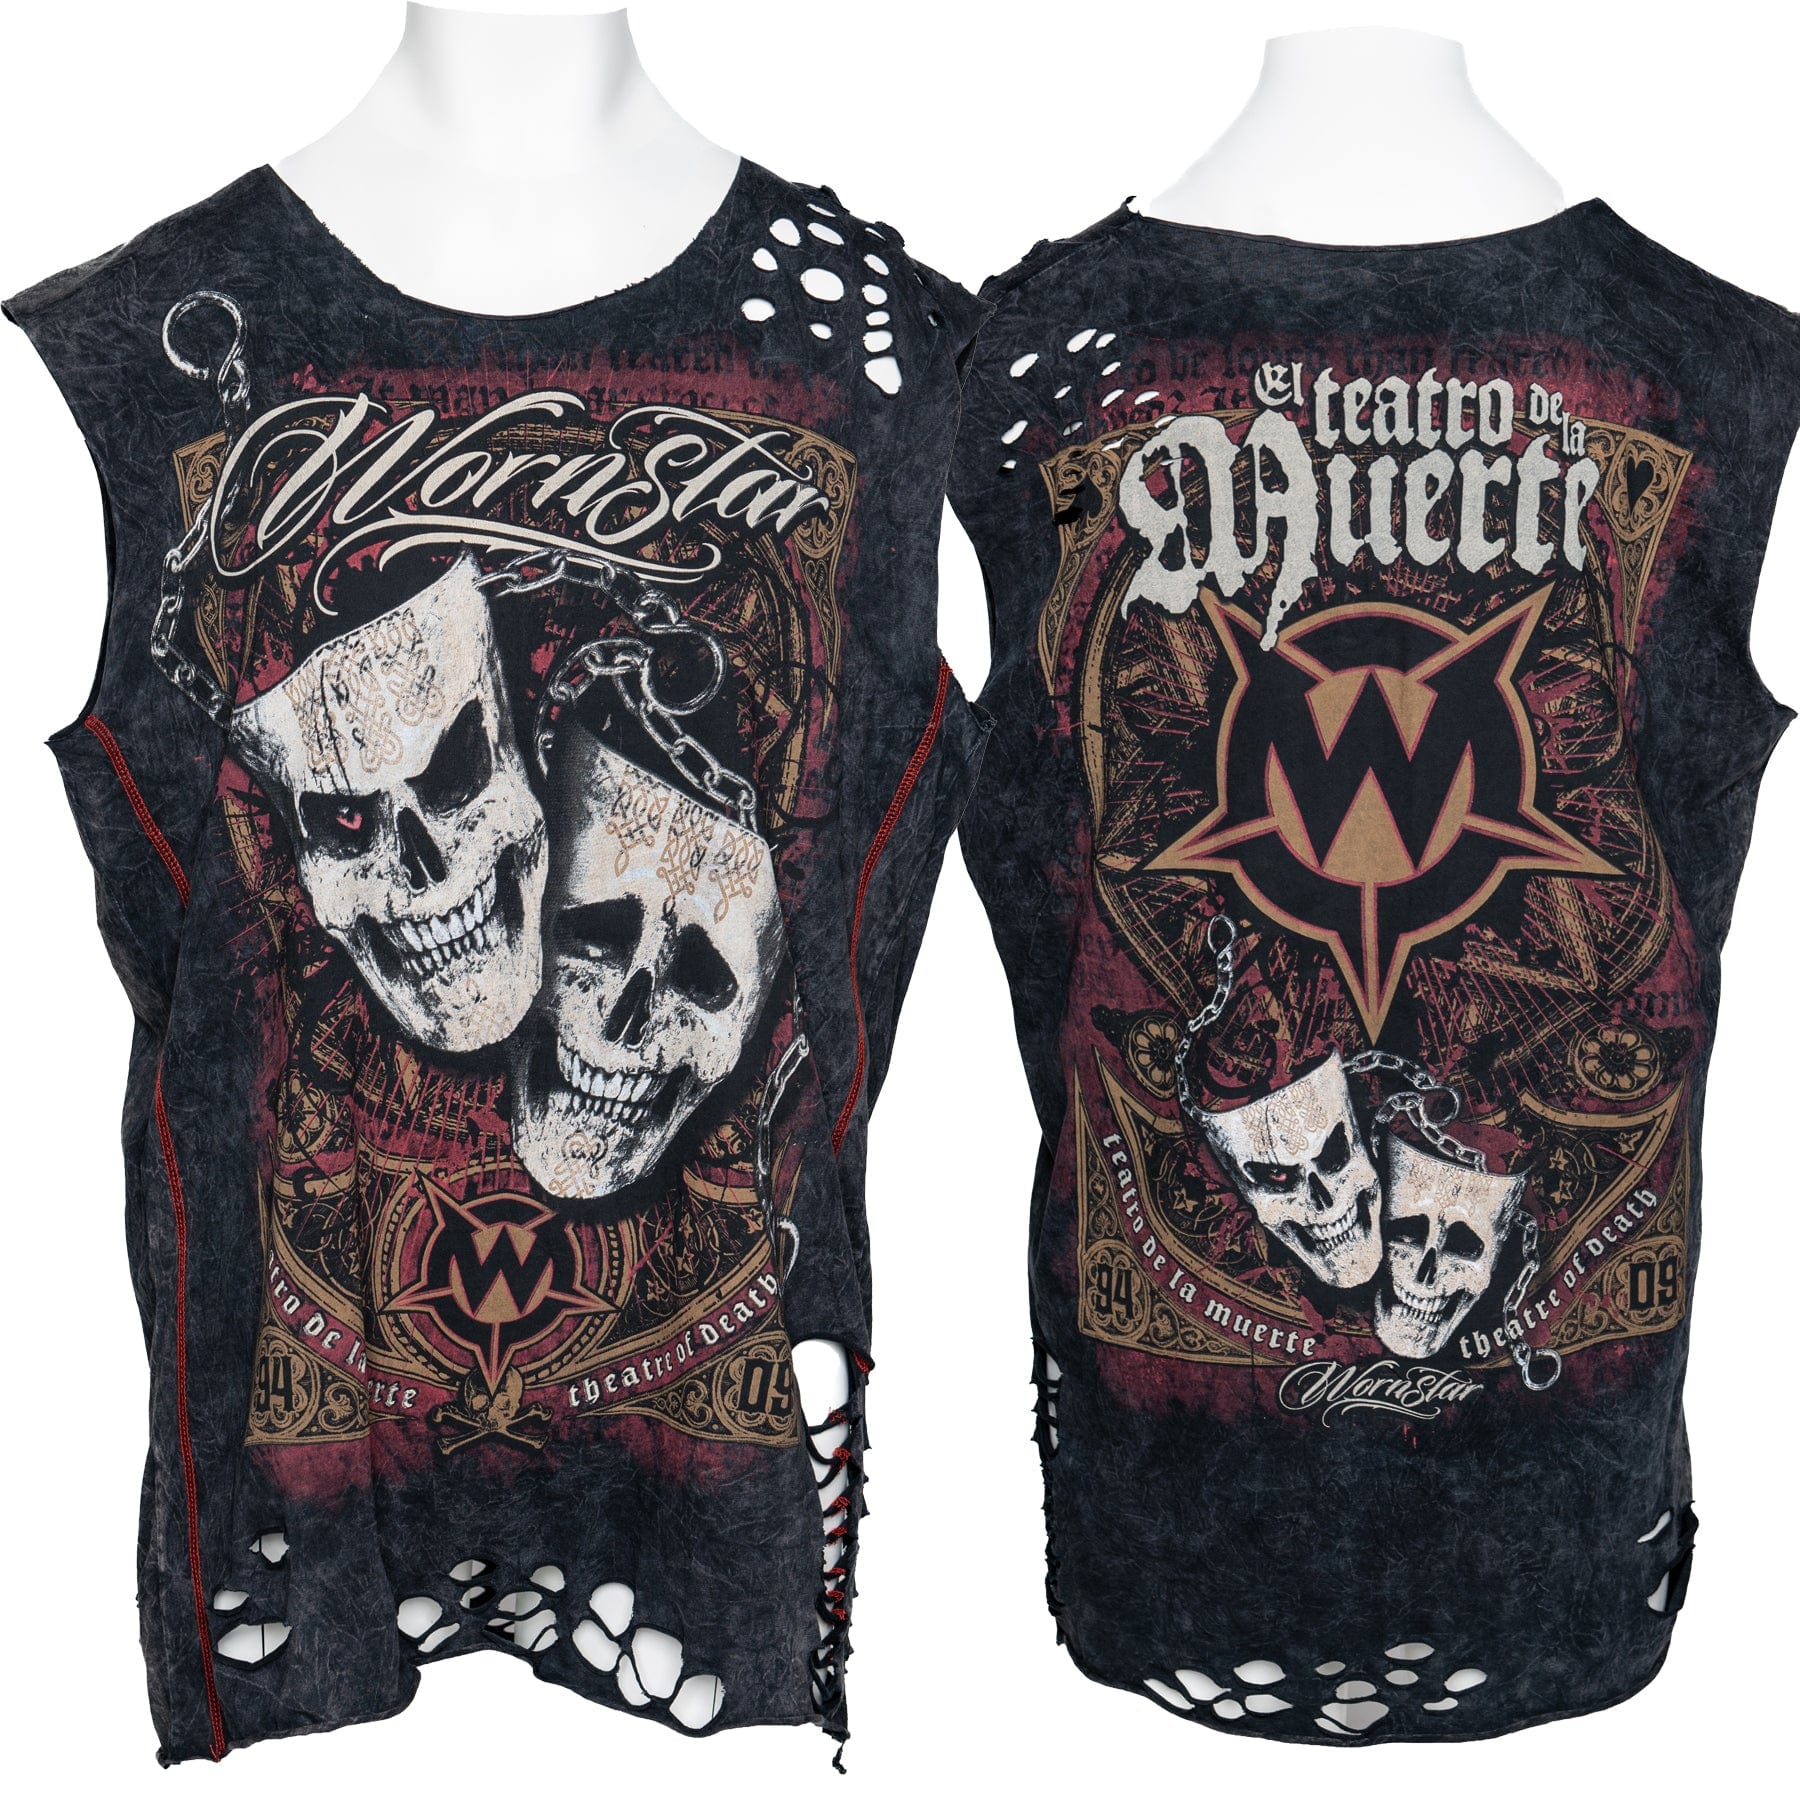 Sirens Collection T-Shirt One Size Wornstar Custom - Cut Tee - Muerte OS Ready to Ship